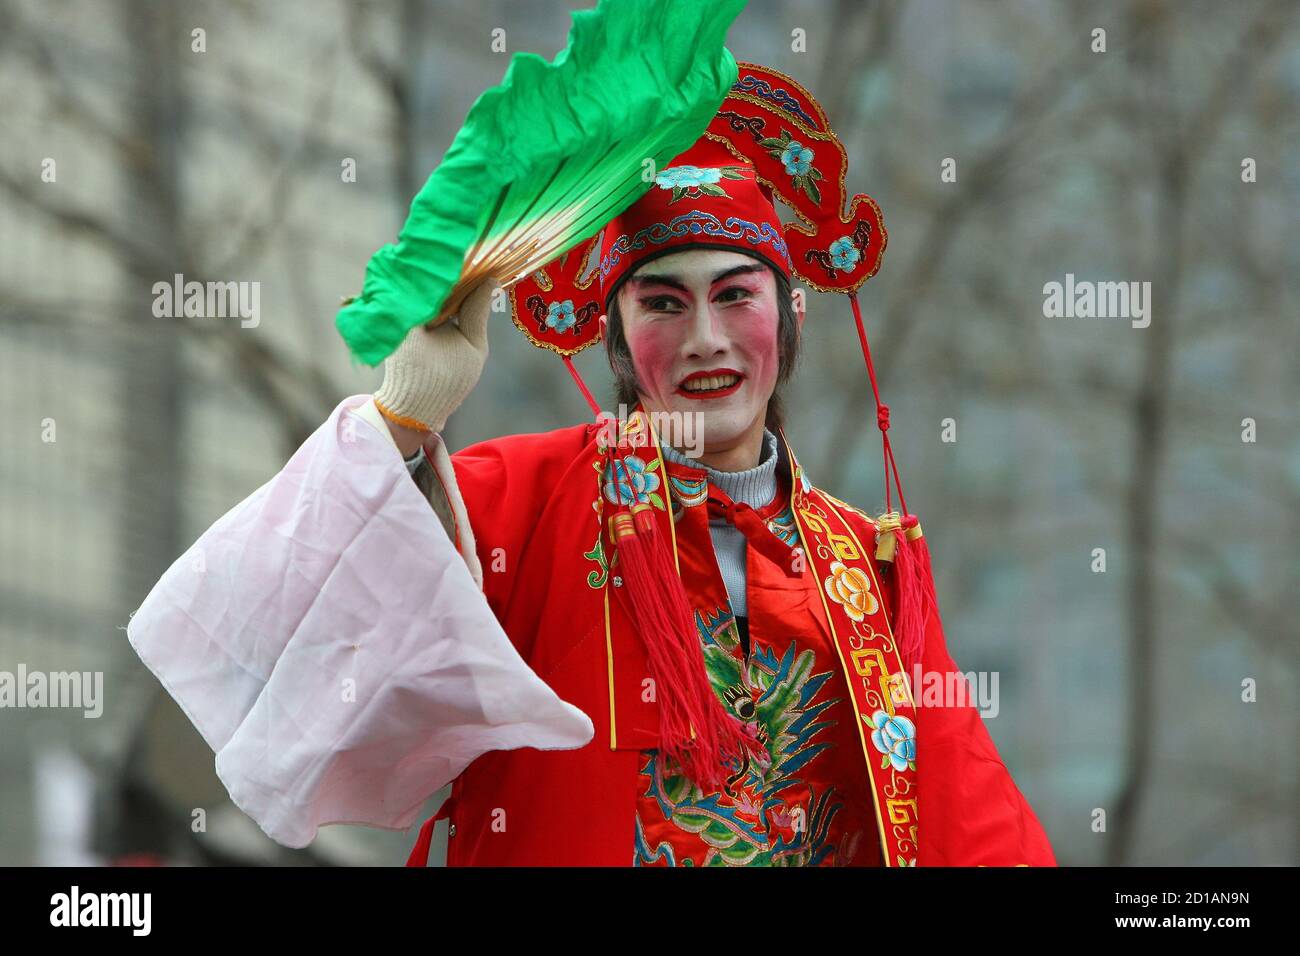 A Chinese artiste performs during a temple fair in Beijing January 30, 2006. China marked the start of the Year of the Dog on Sunday with [fireworks and dumplings, as the biggest holiday in the Chinese world reached a crescendo.] Stock Photo